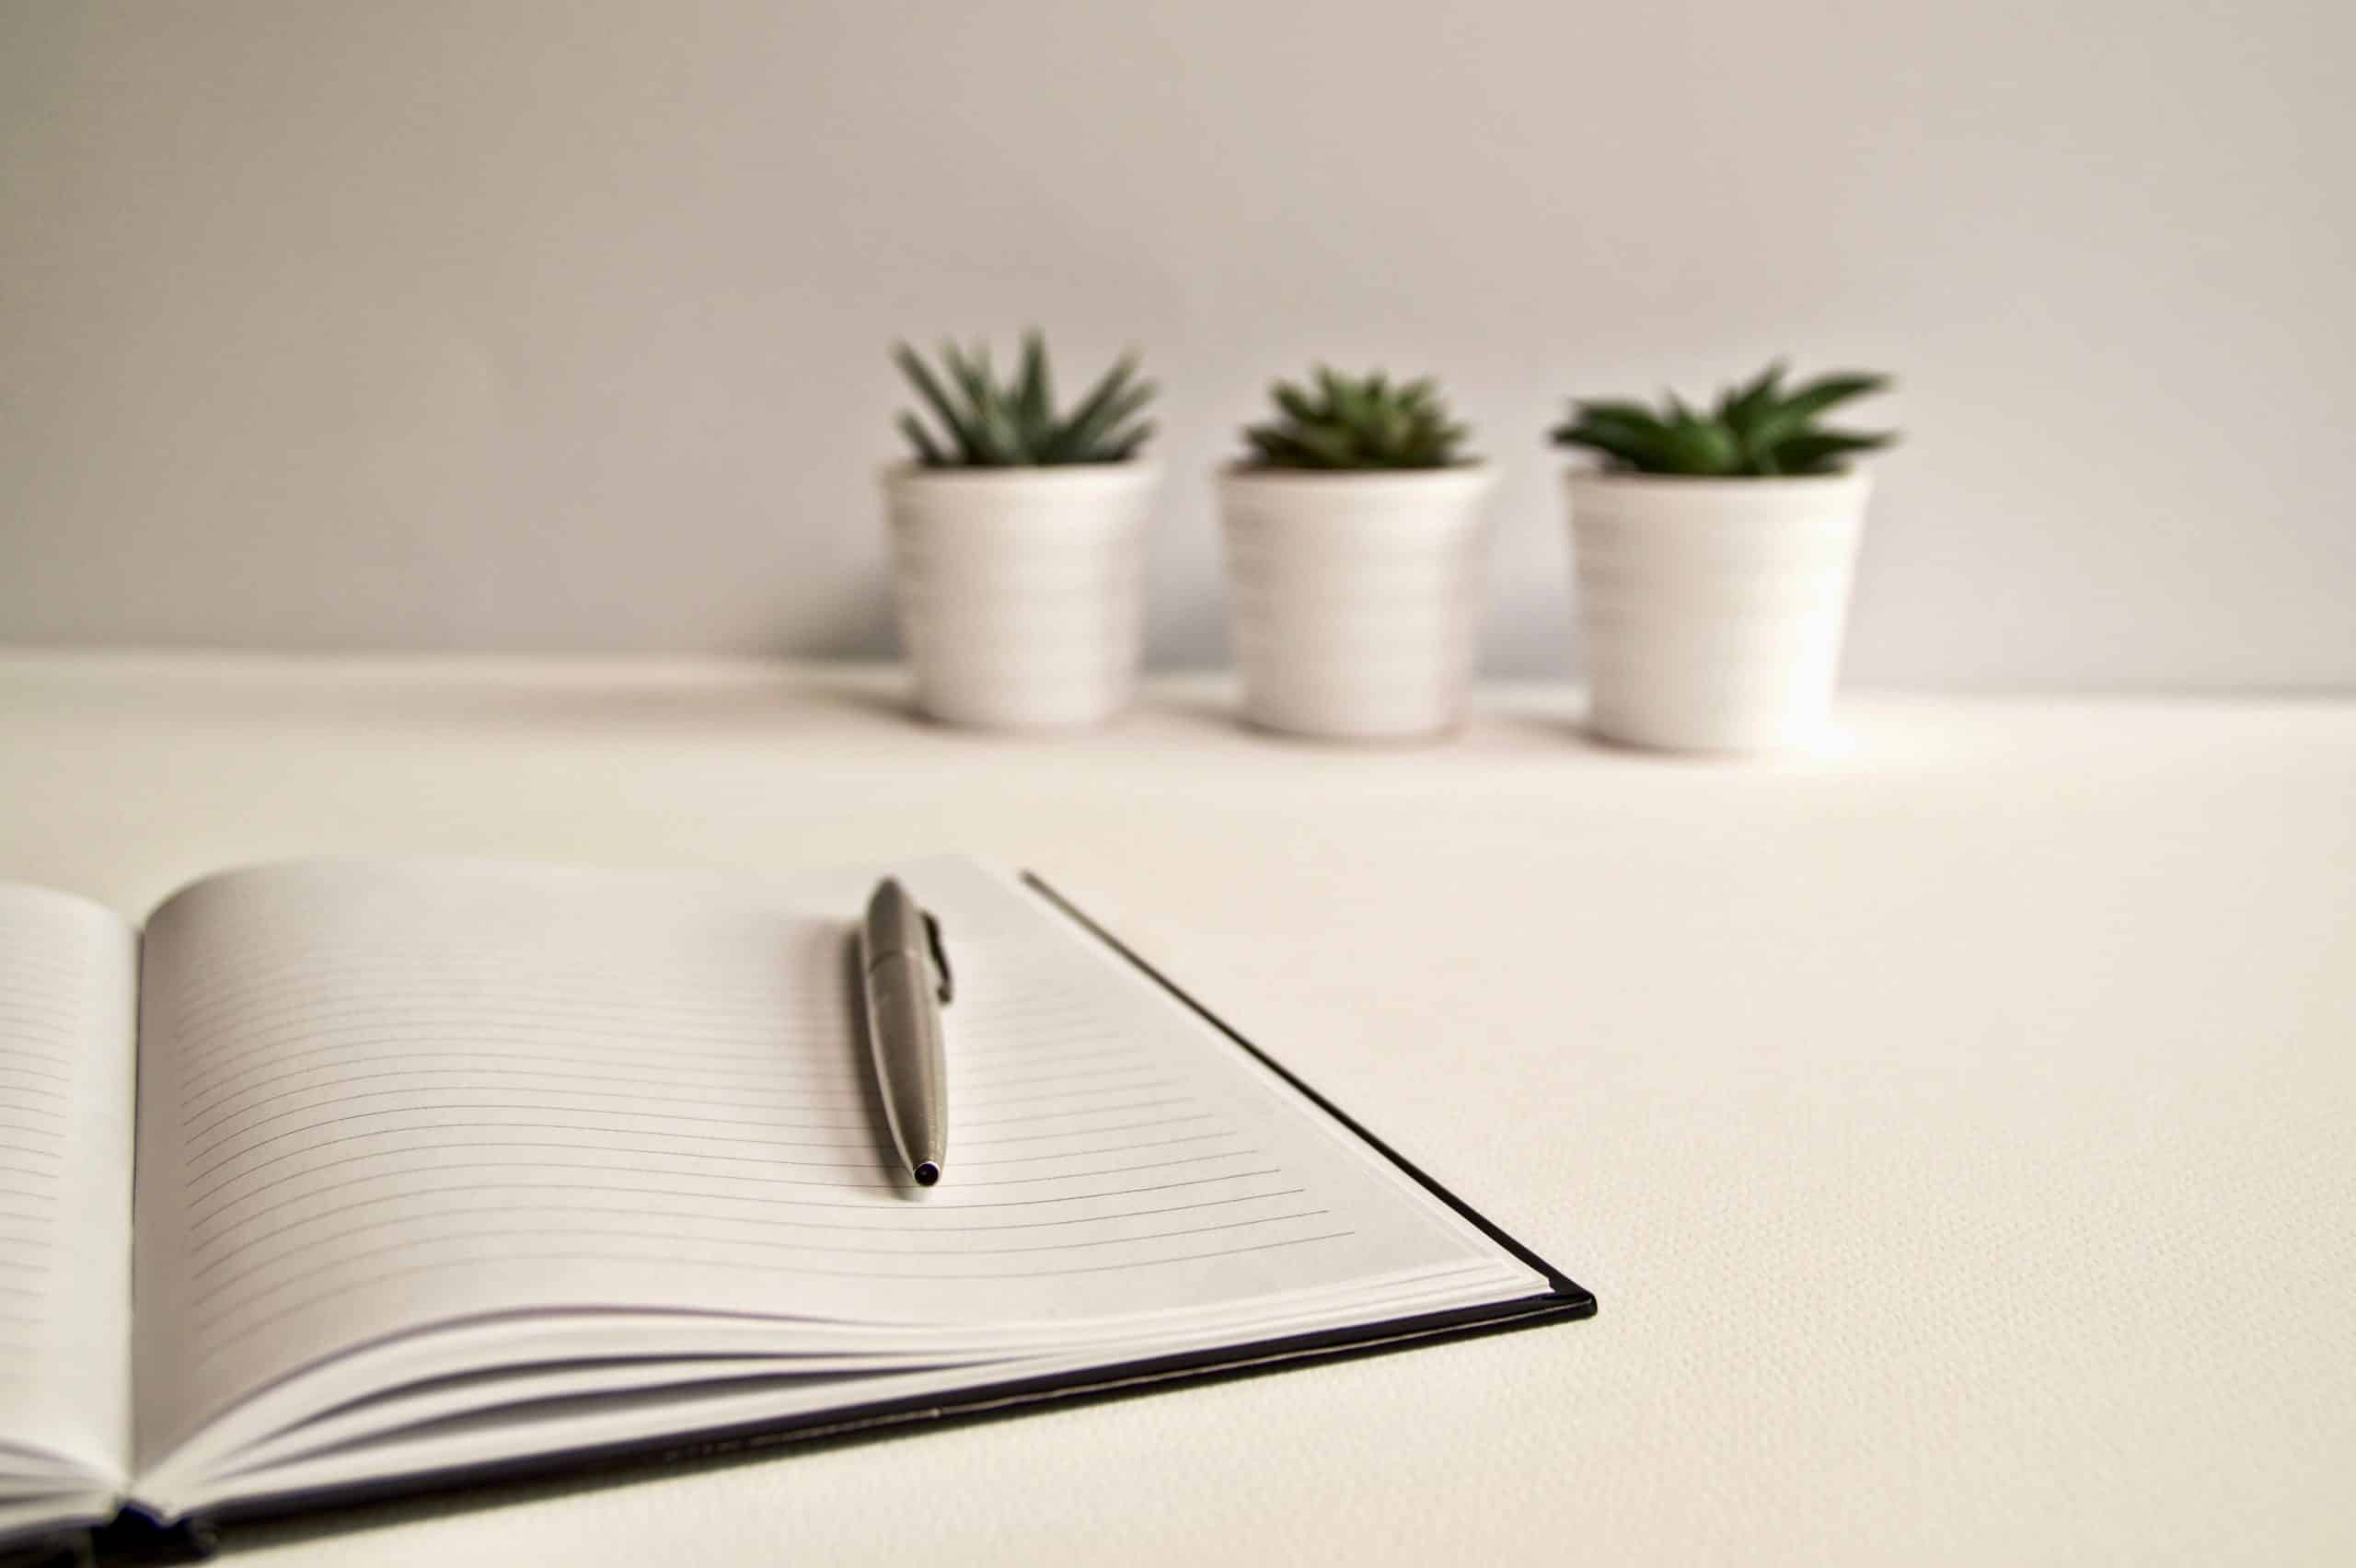 notebook and pen on white desk with potted cactus plants.